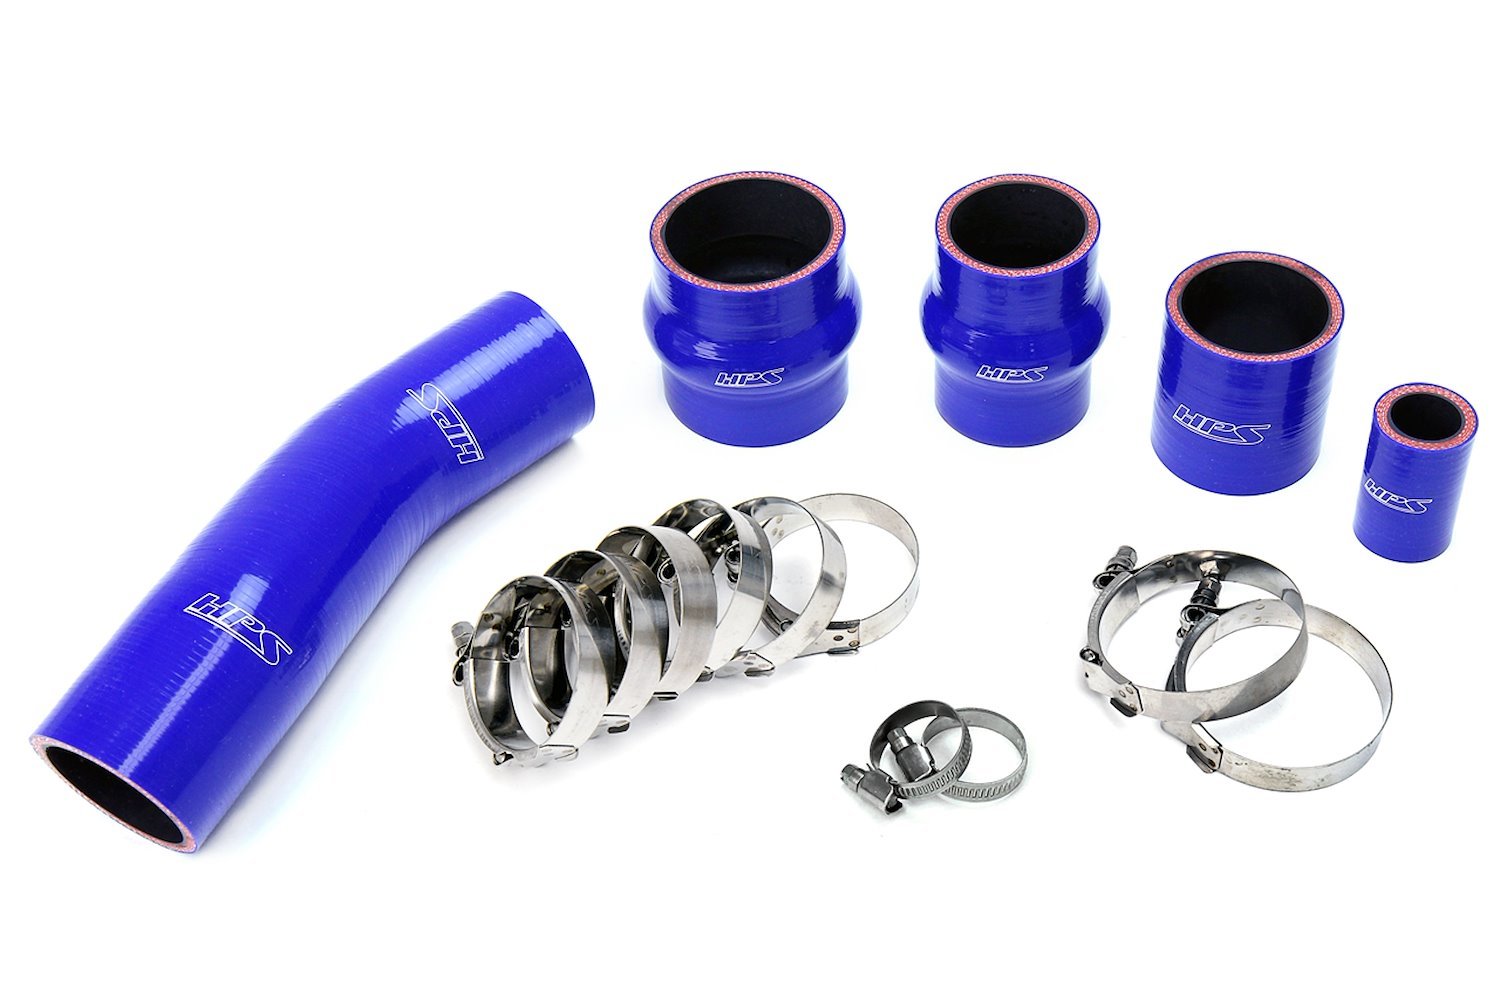 57-1711-BLUE Intercooler Hose Kit, High-Temp 4-Ply Reinforced Silicone, Replace OEM Rubber Intercooler Turbo Boots